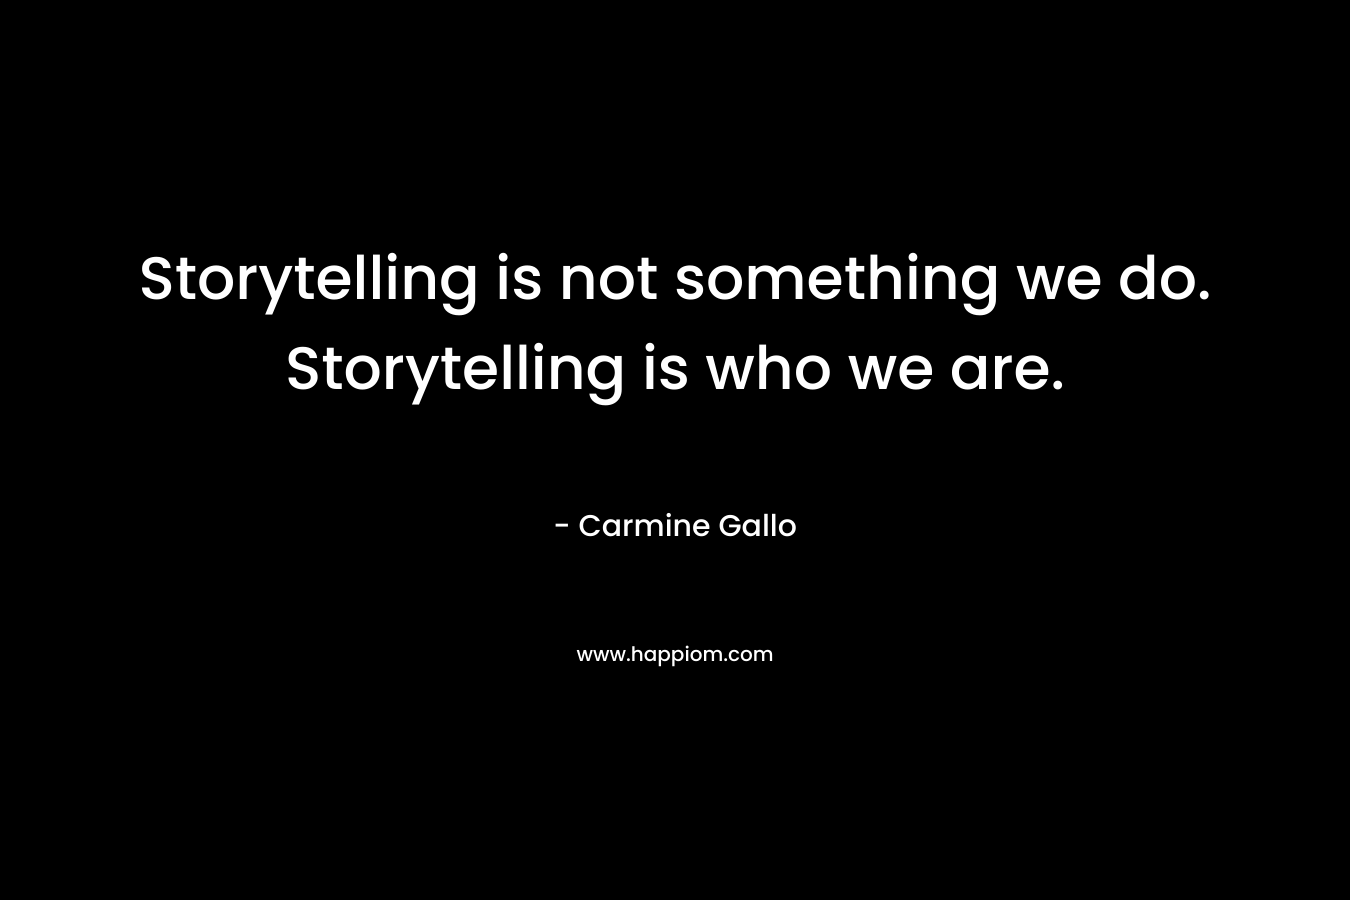 Storytelling is not something we do. Storytelling is who we are.